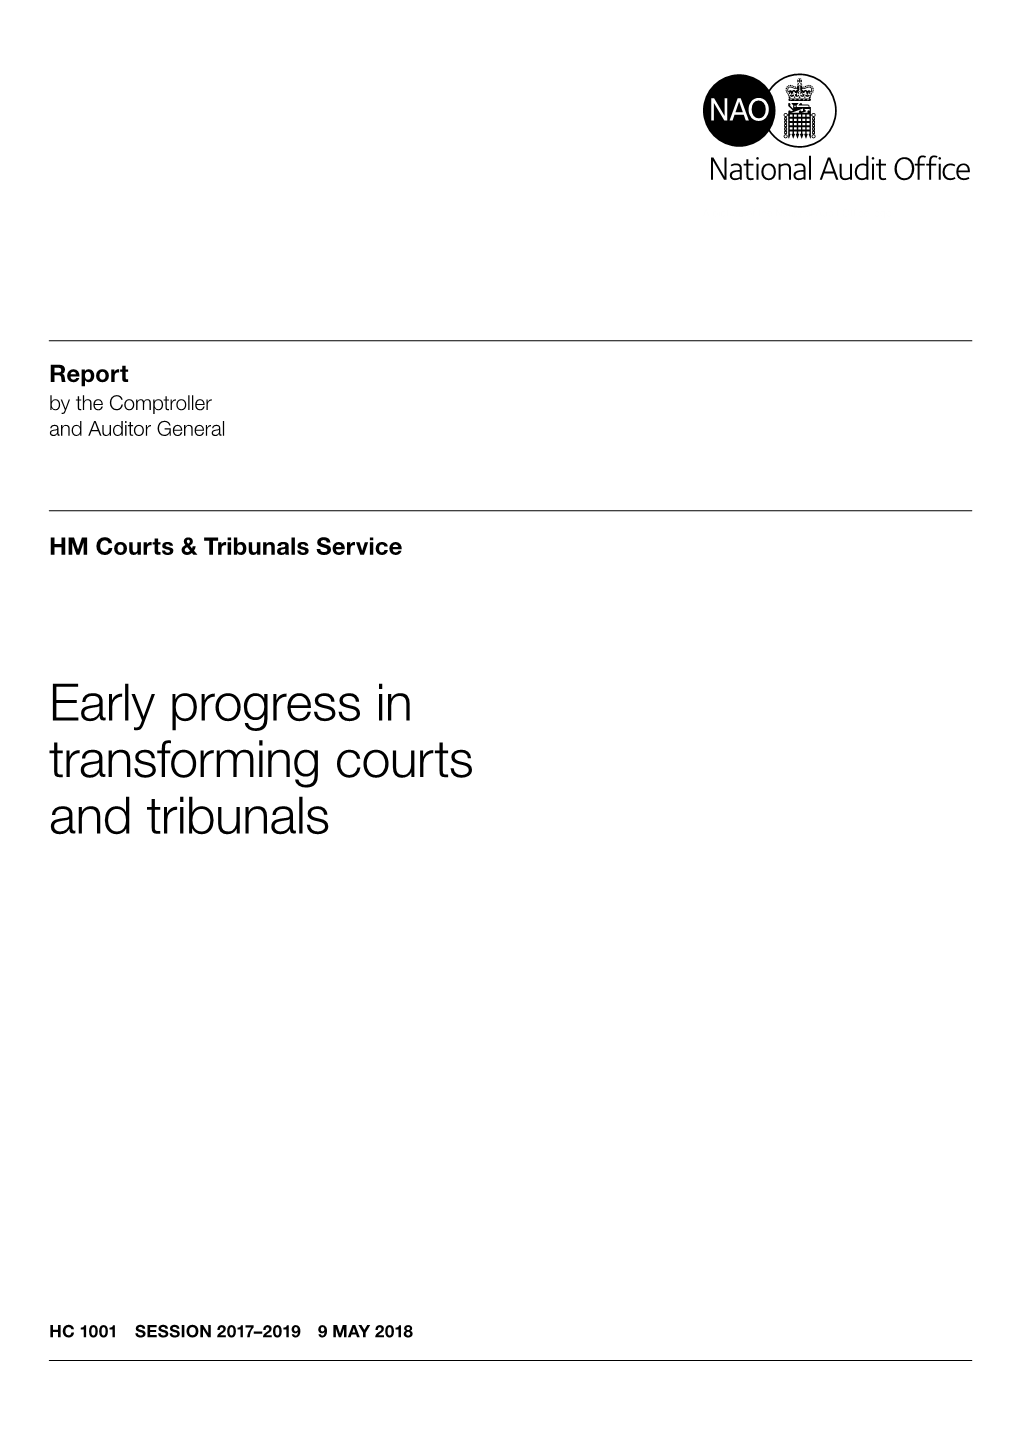 Early Progress in Transforming Courts and Tribunals